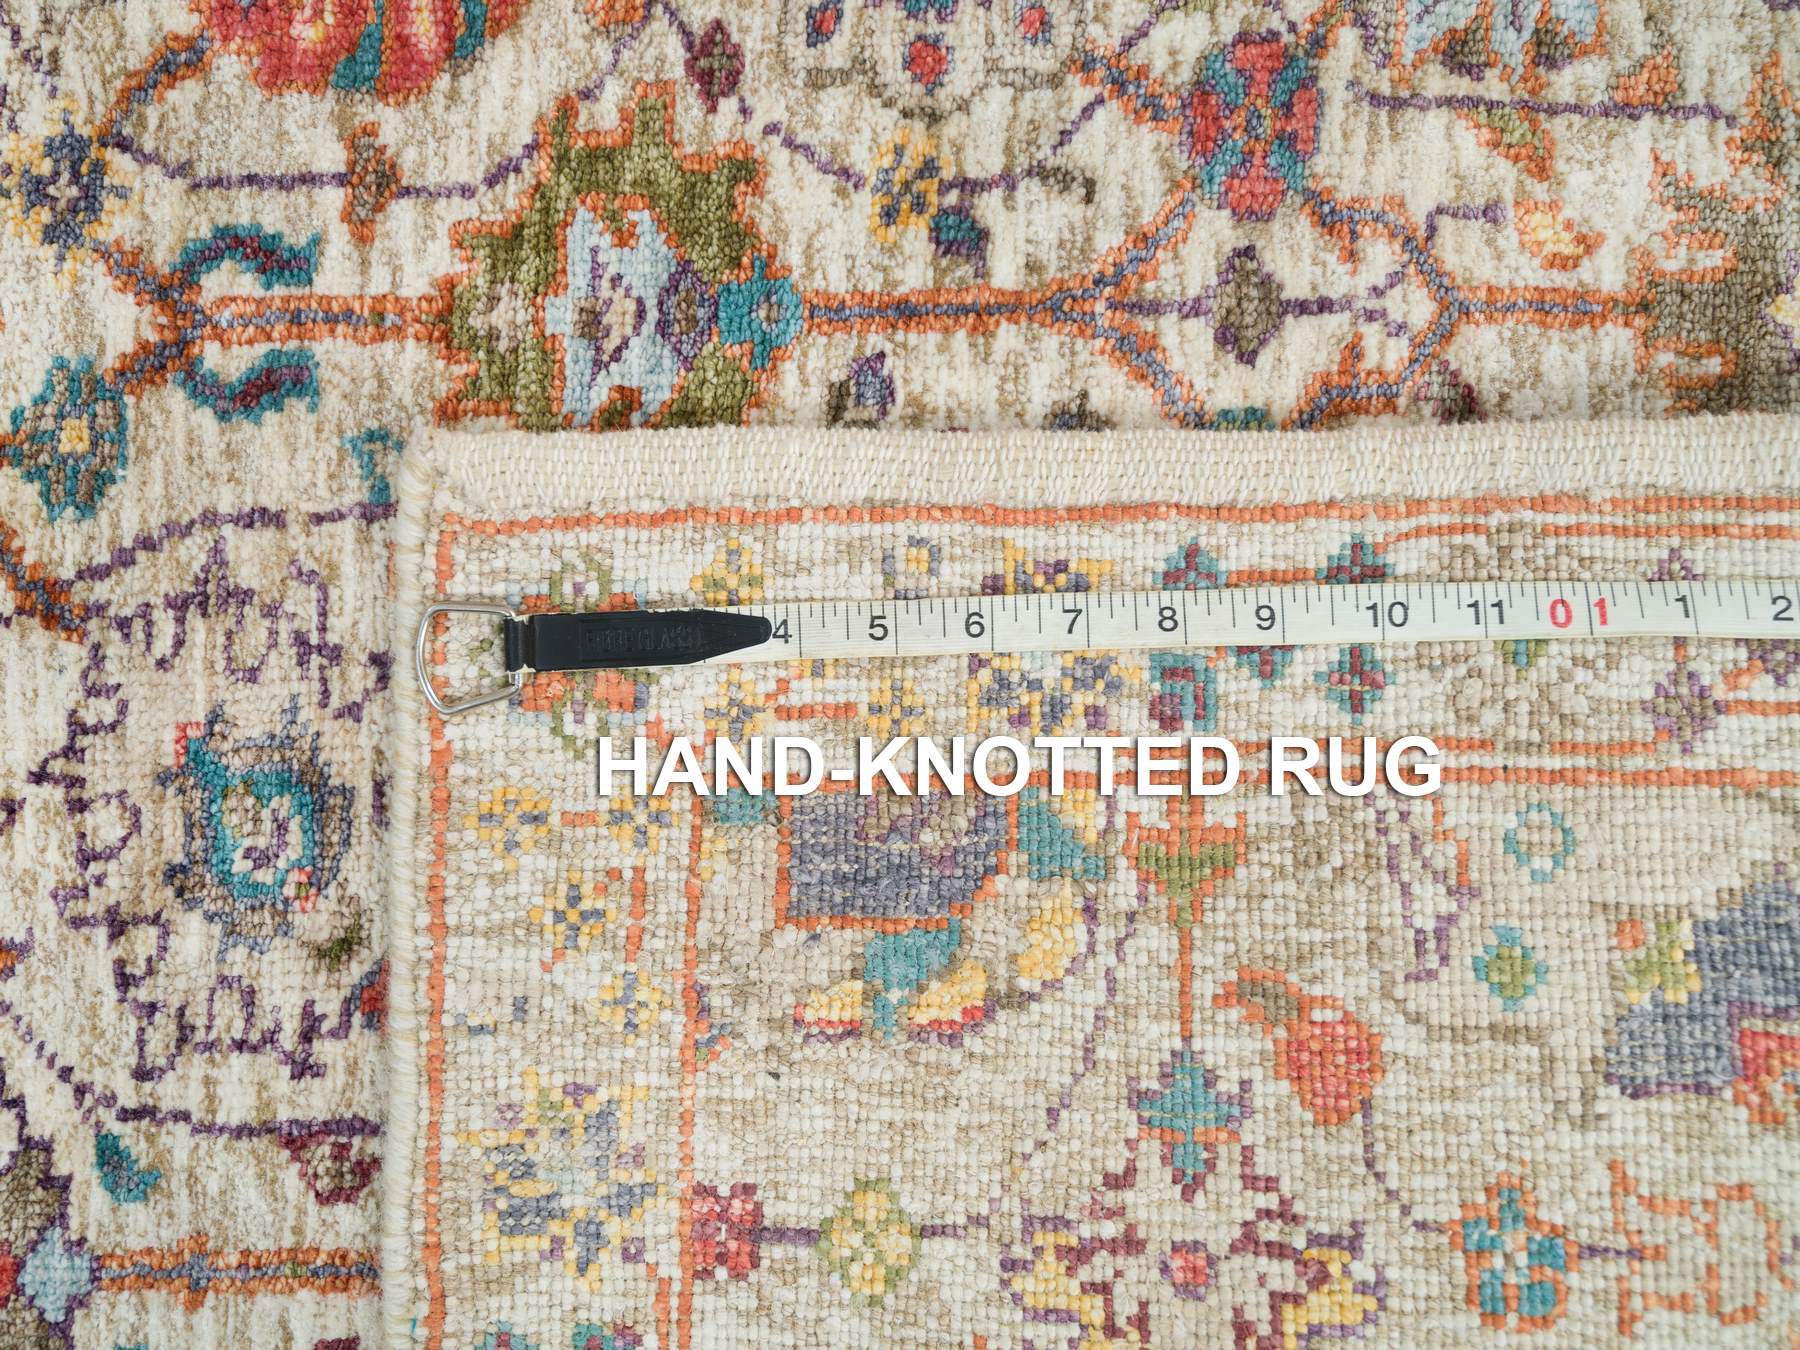 Transitional Rugs LUV593244